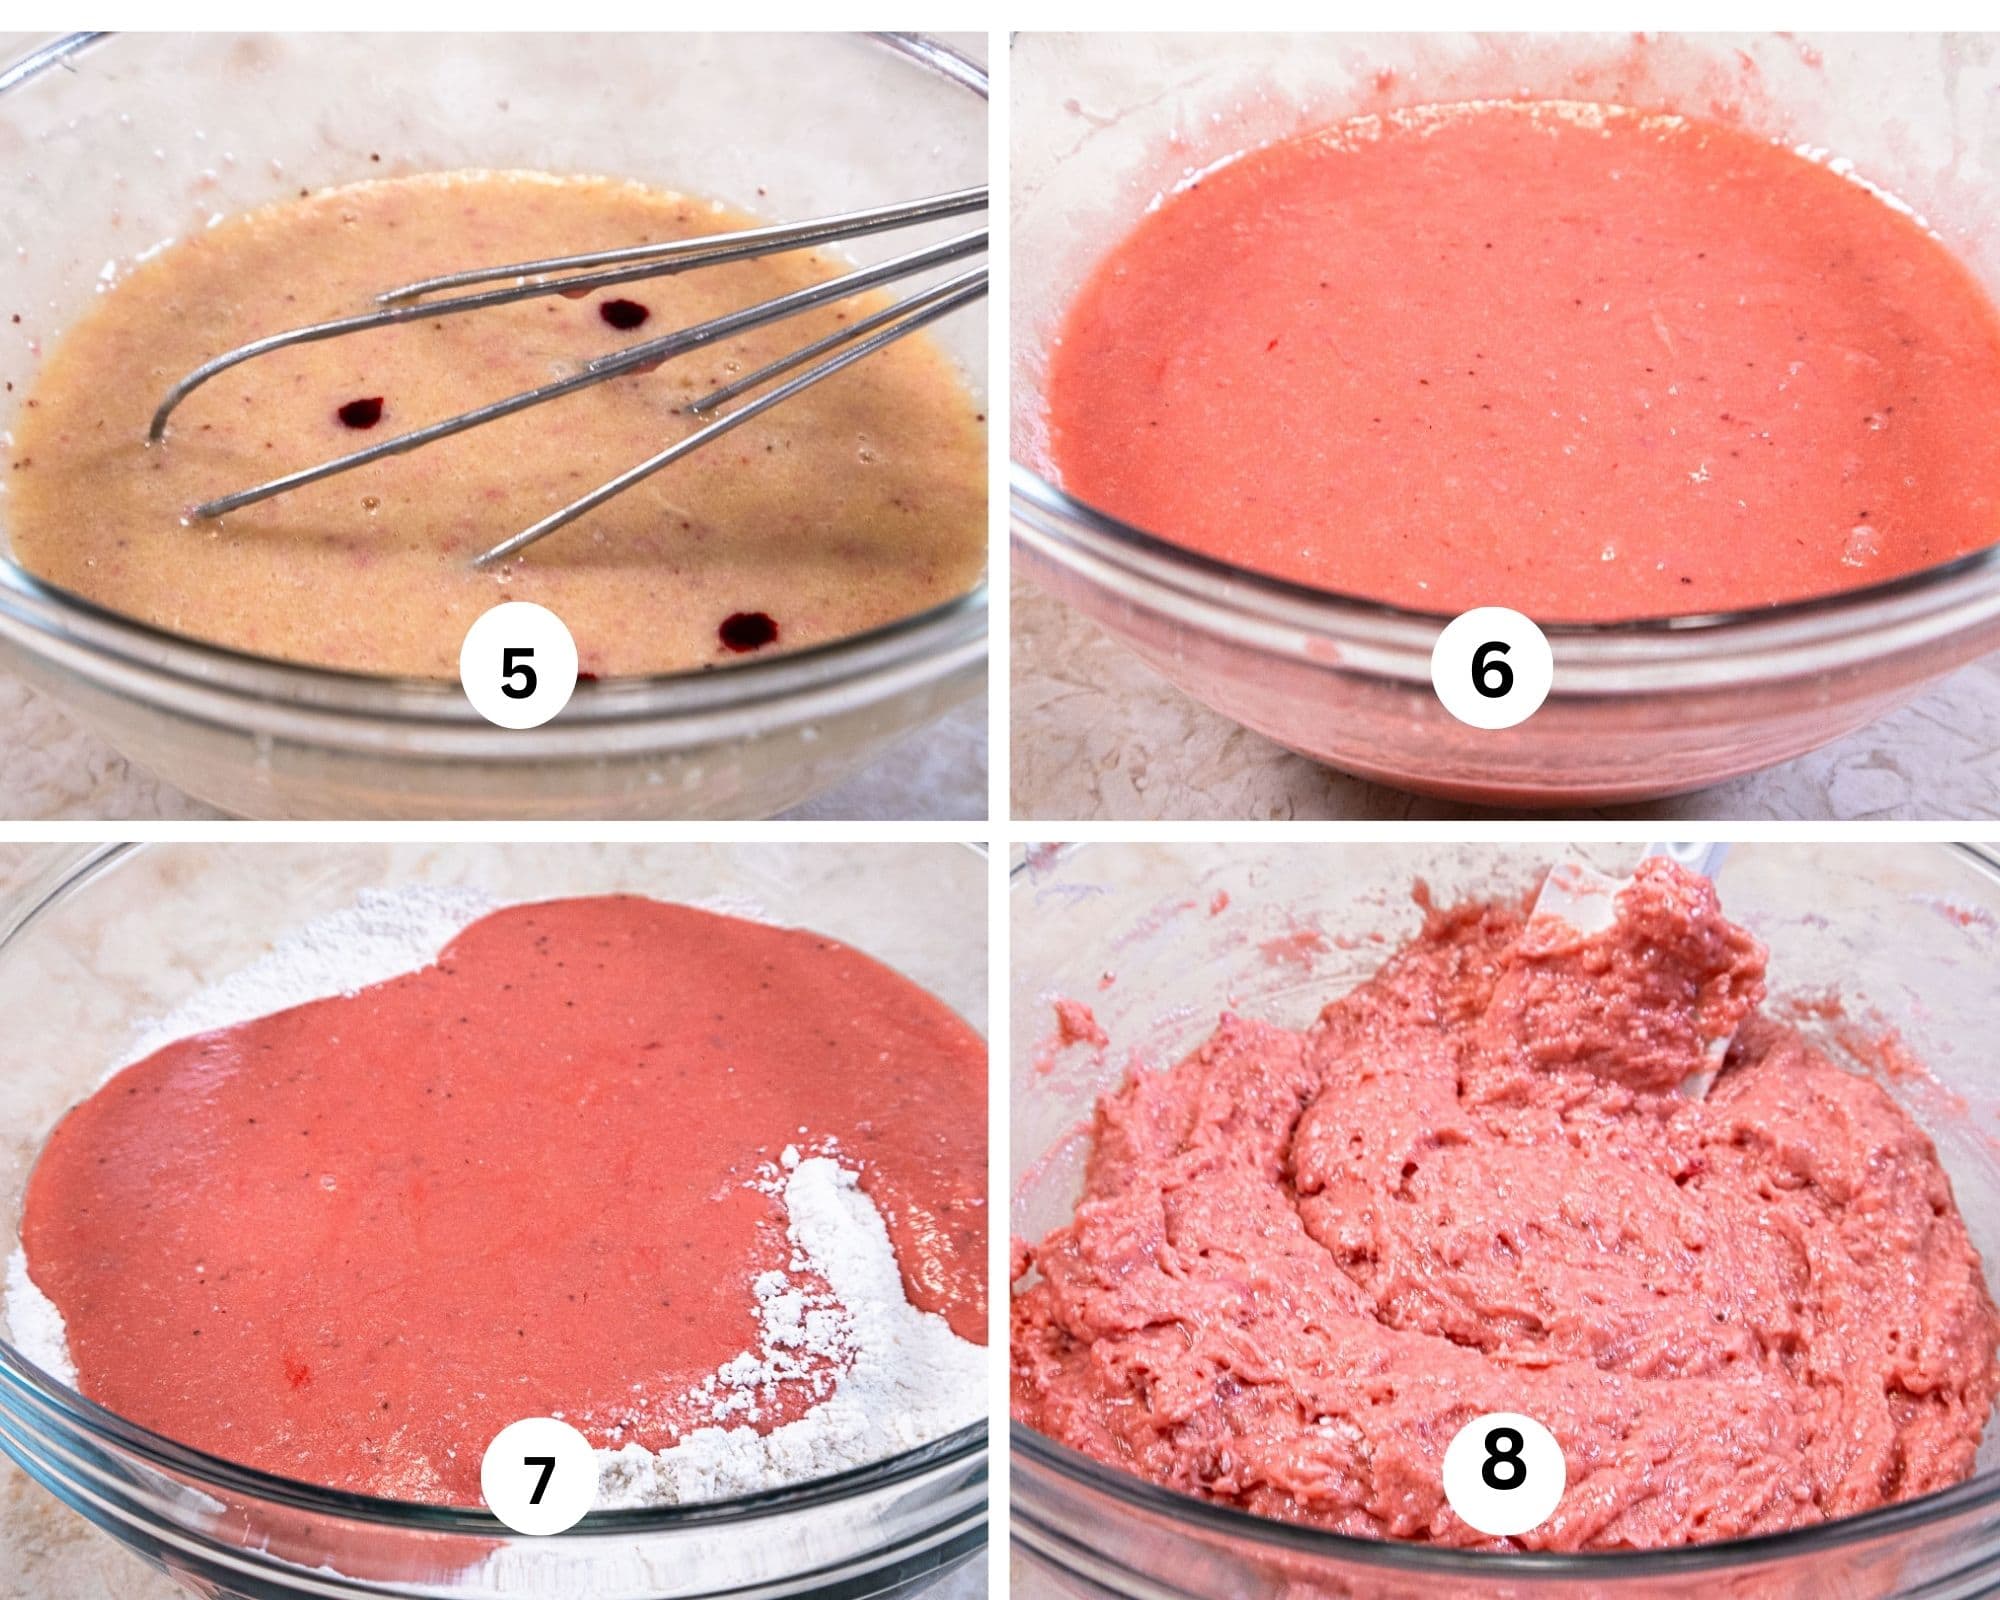 The second collage shows the red coloring in liquid ingredients, the ingredients mixed, the flour added and the finished batter.